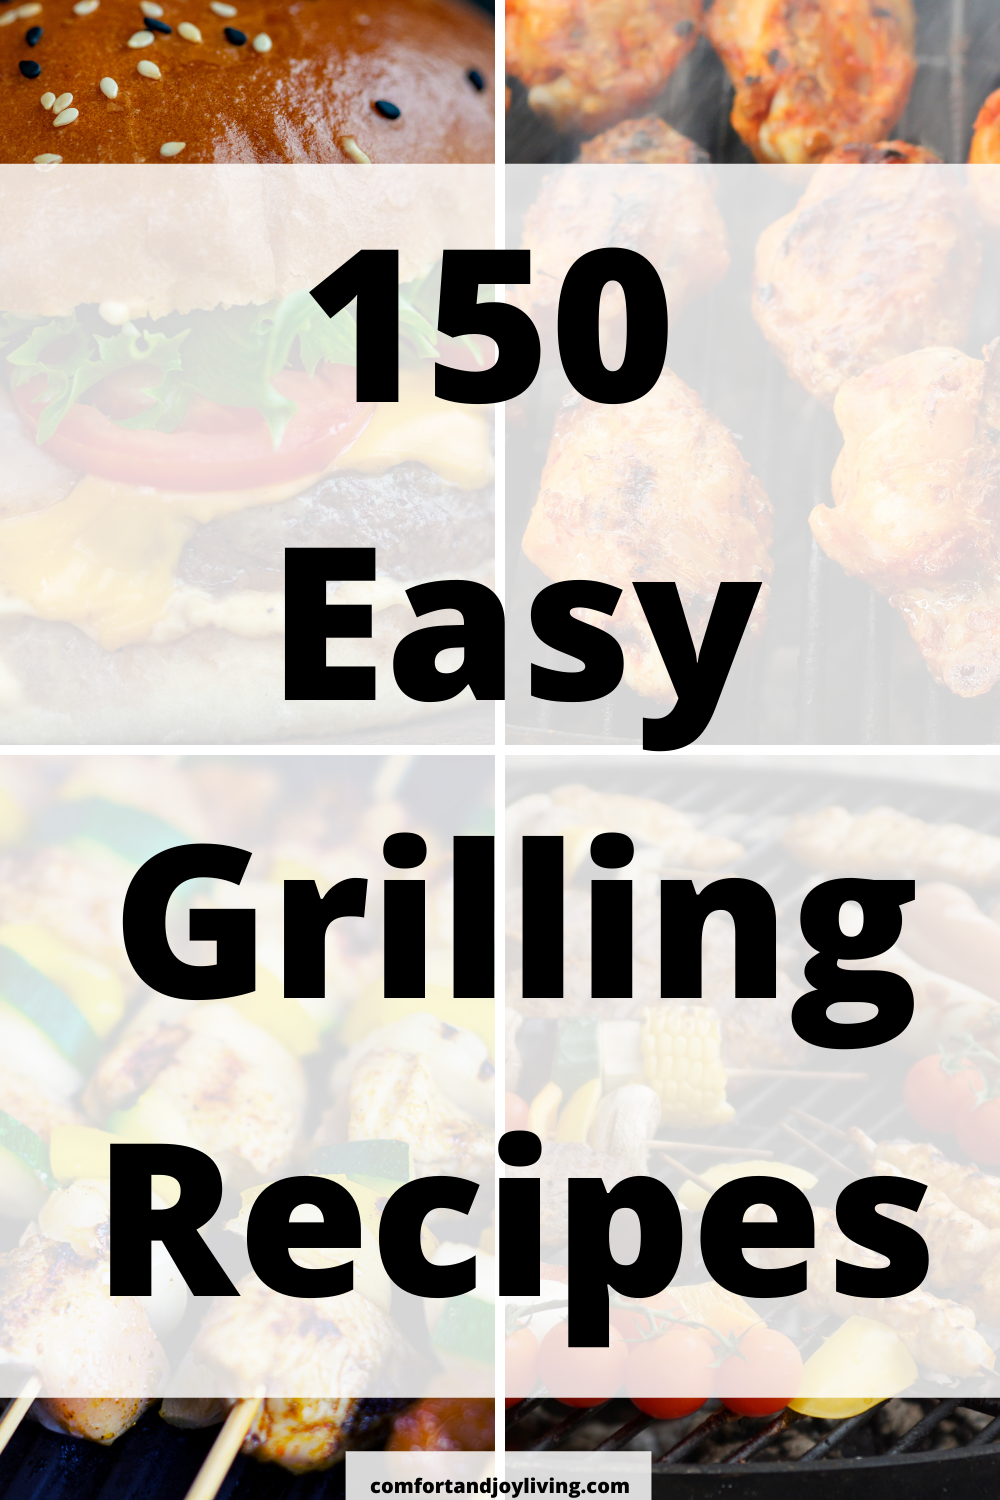 150 Easy Grilling Recipes